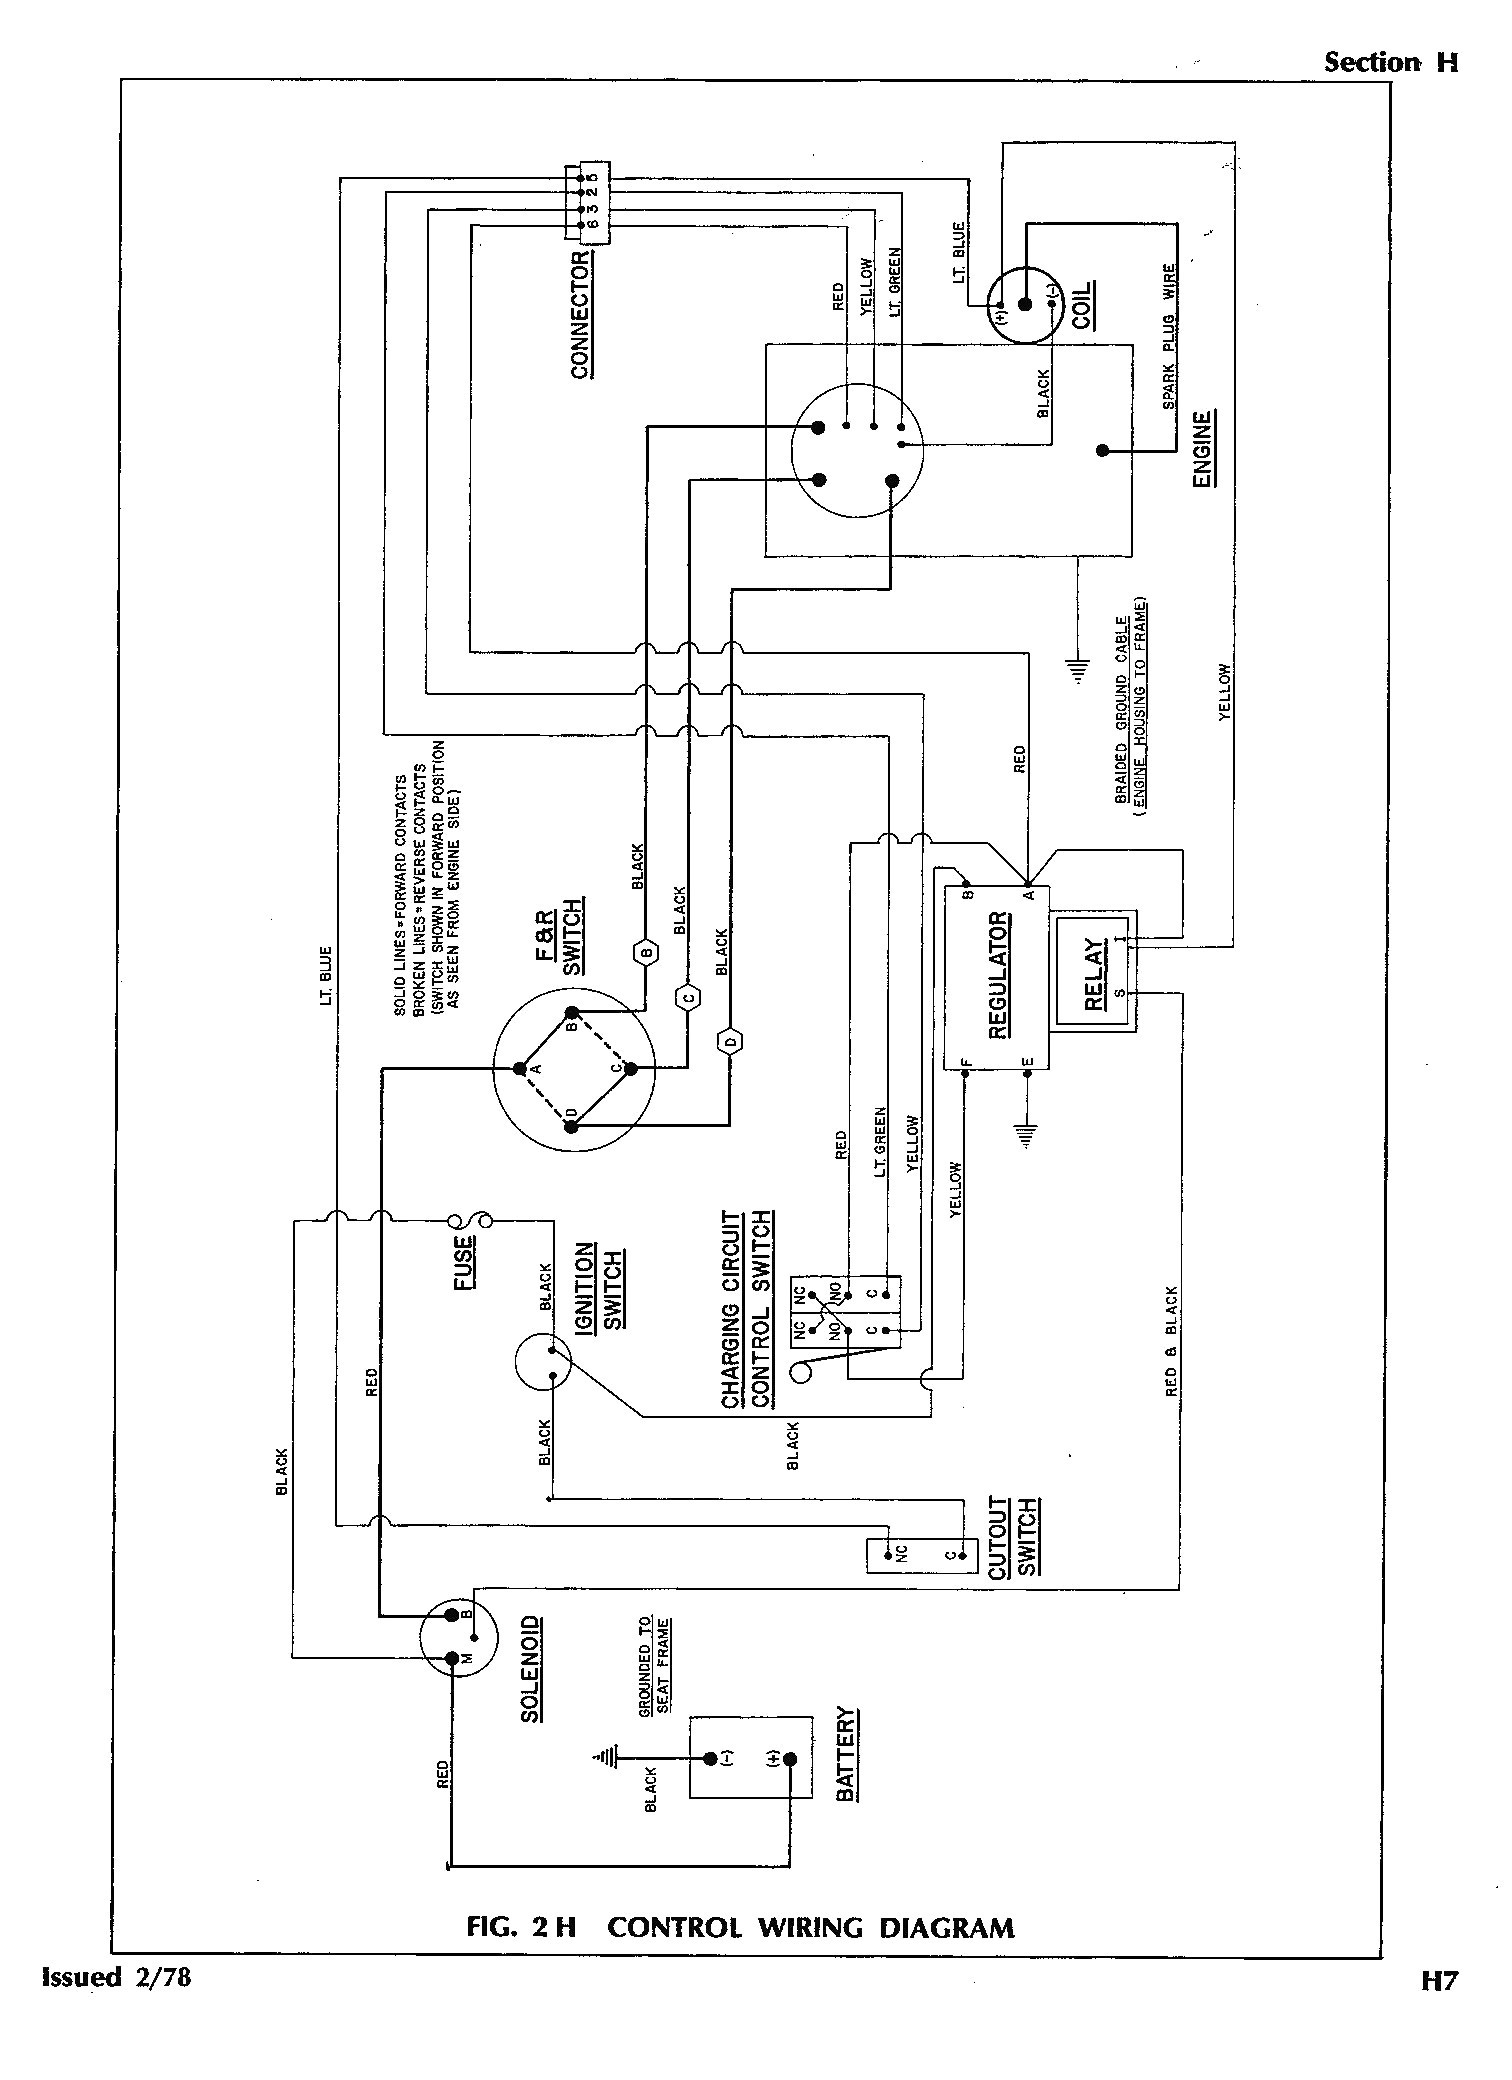 Labeled wiring diagram for 1984 ezgo gas golf cart wiring diagram for 1996 ezgo gas golf cart wiring diagram for 2000 ezgo gas golf cart wiring diagram